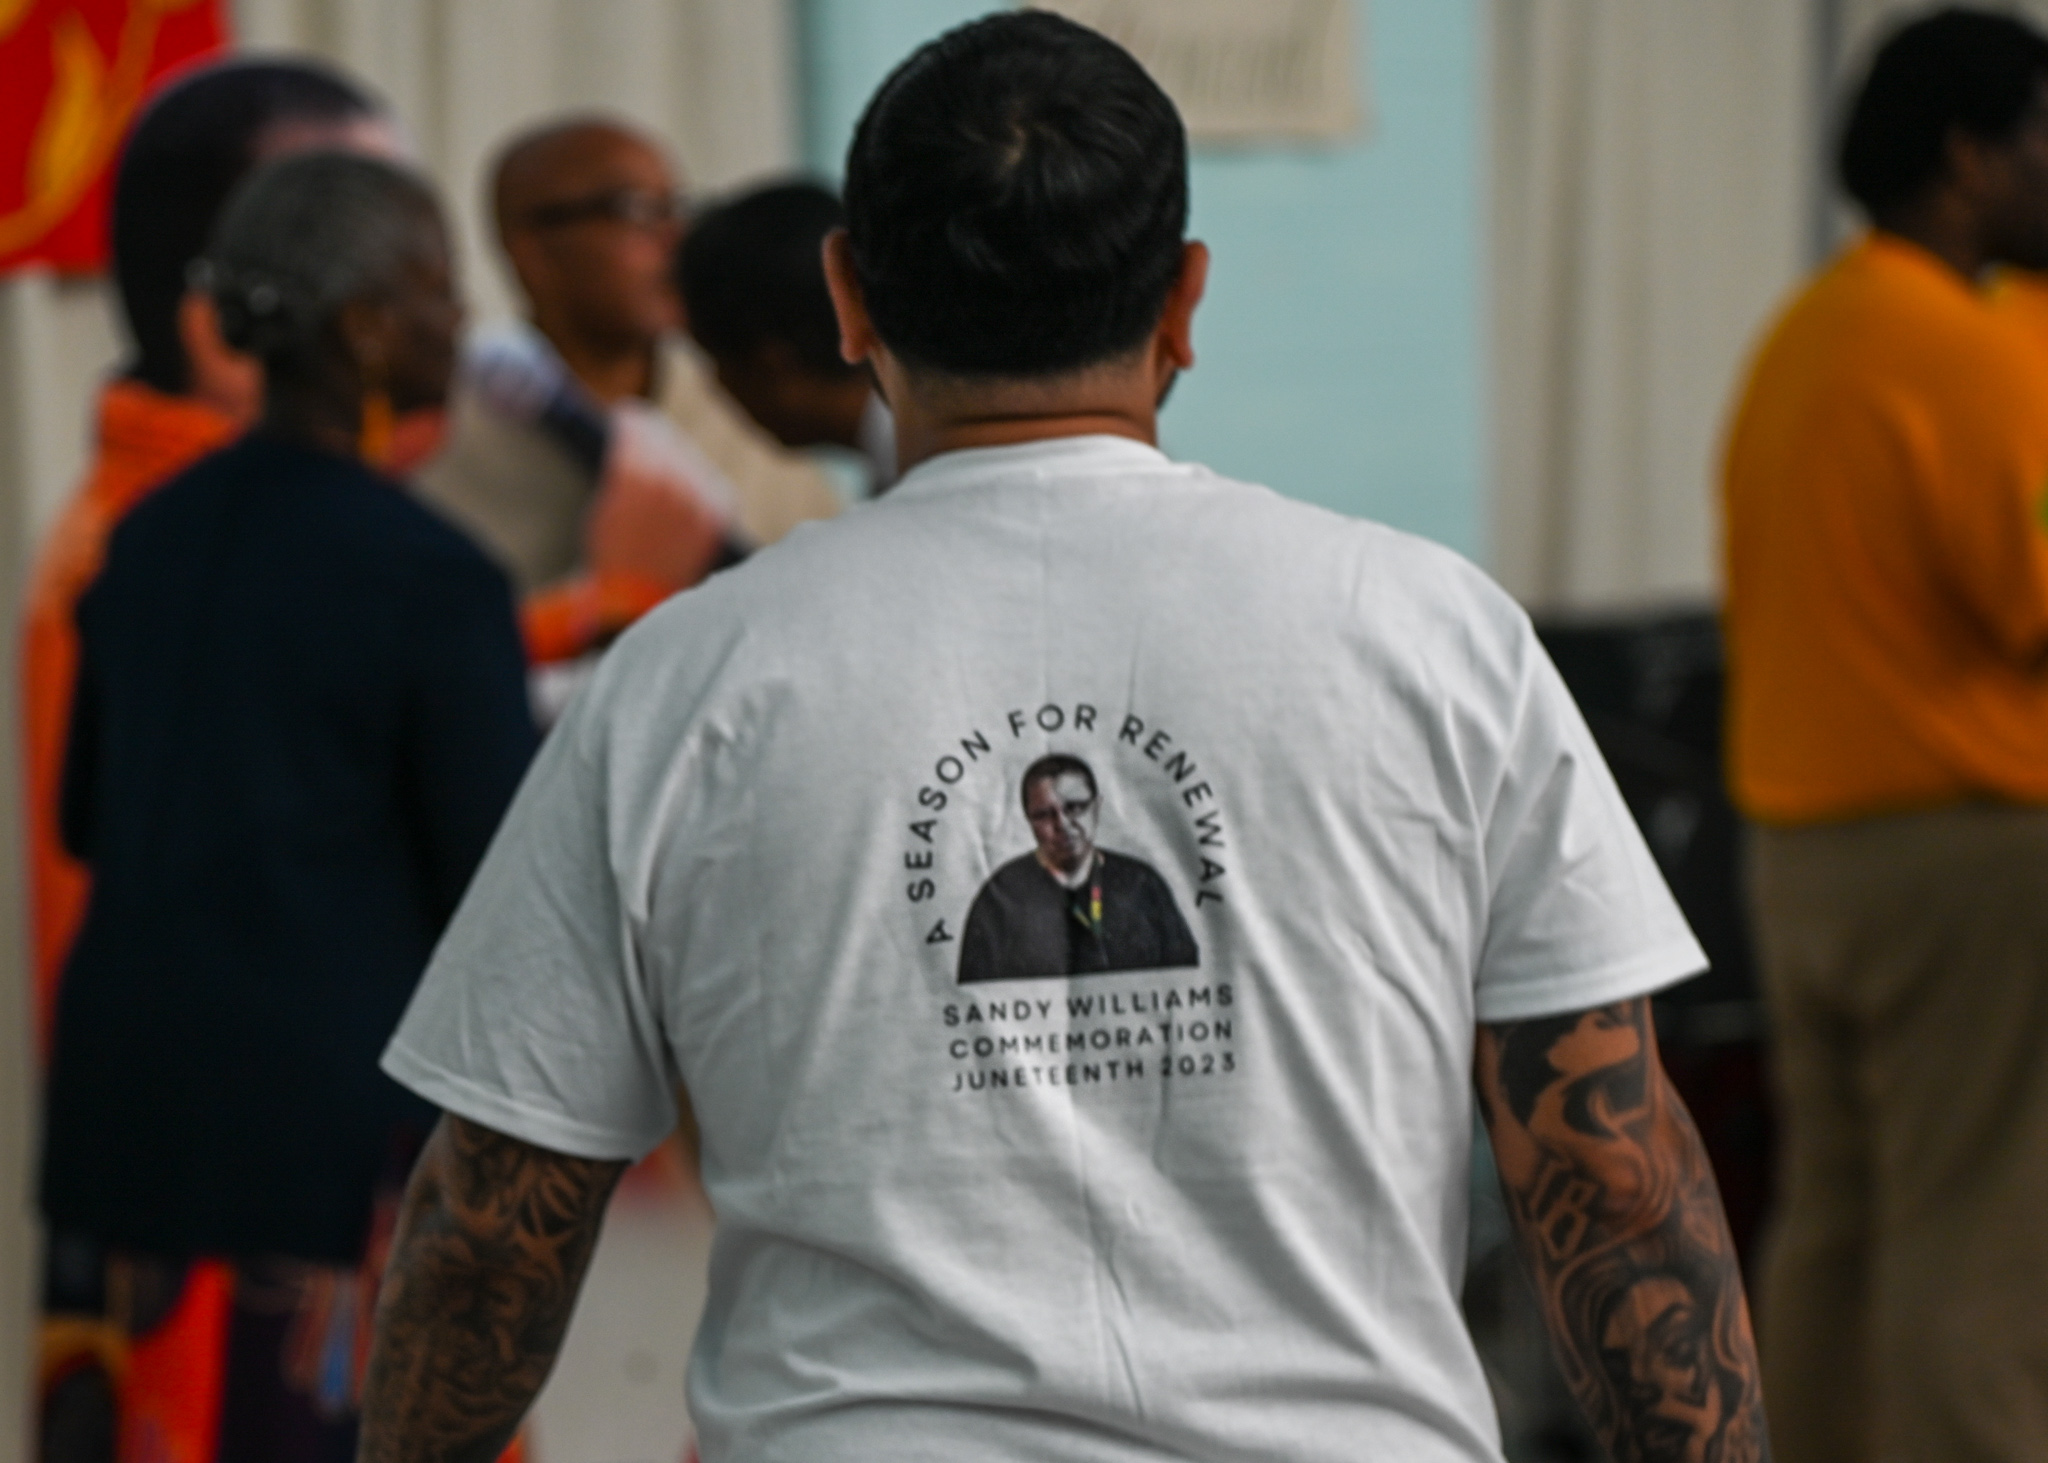 T-shirt in memory of Sandy Williams worn by an incarcerated individual that was donated by Freedom Project East for the Juneteenth Celebration. T-shirt reads “A Season for Renewal. Sandy Williams Commemoration. Juneteenth 2023.”